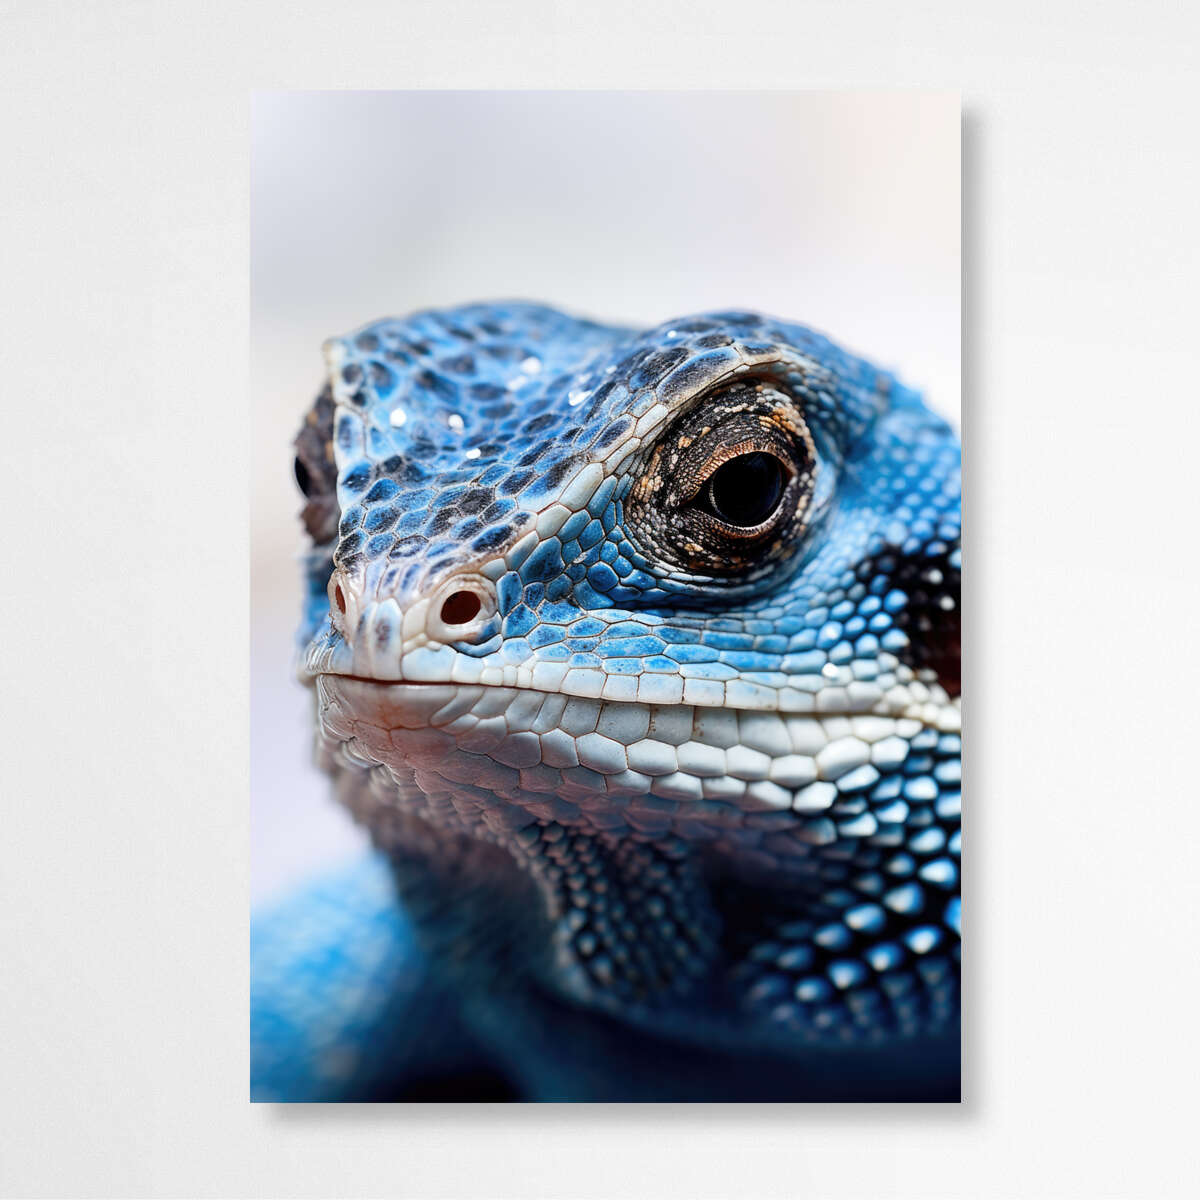 Abstract Portrait of a Blue Tongued Lizard | Australiana Wall Art Prints - The Canvas Hive